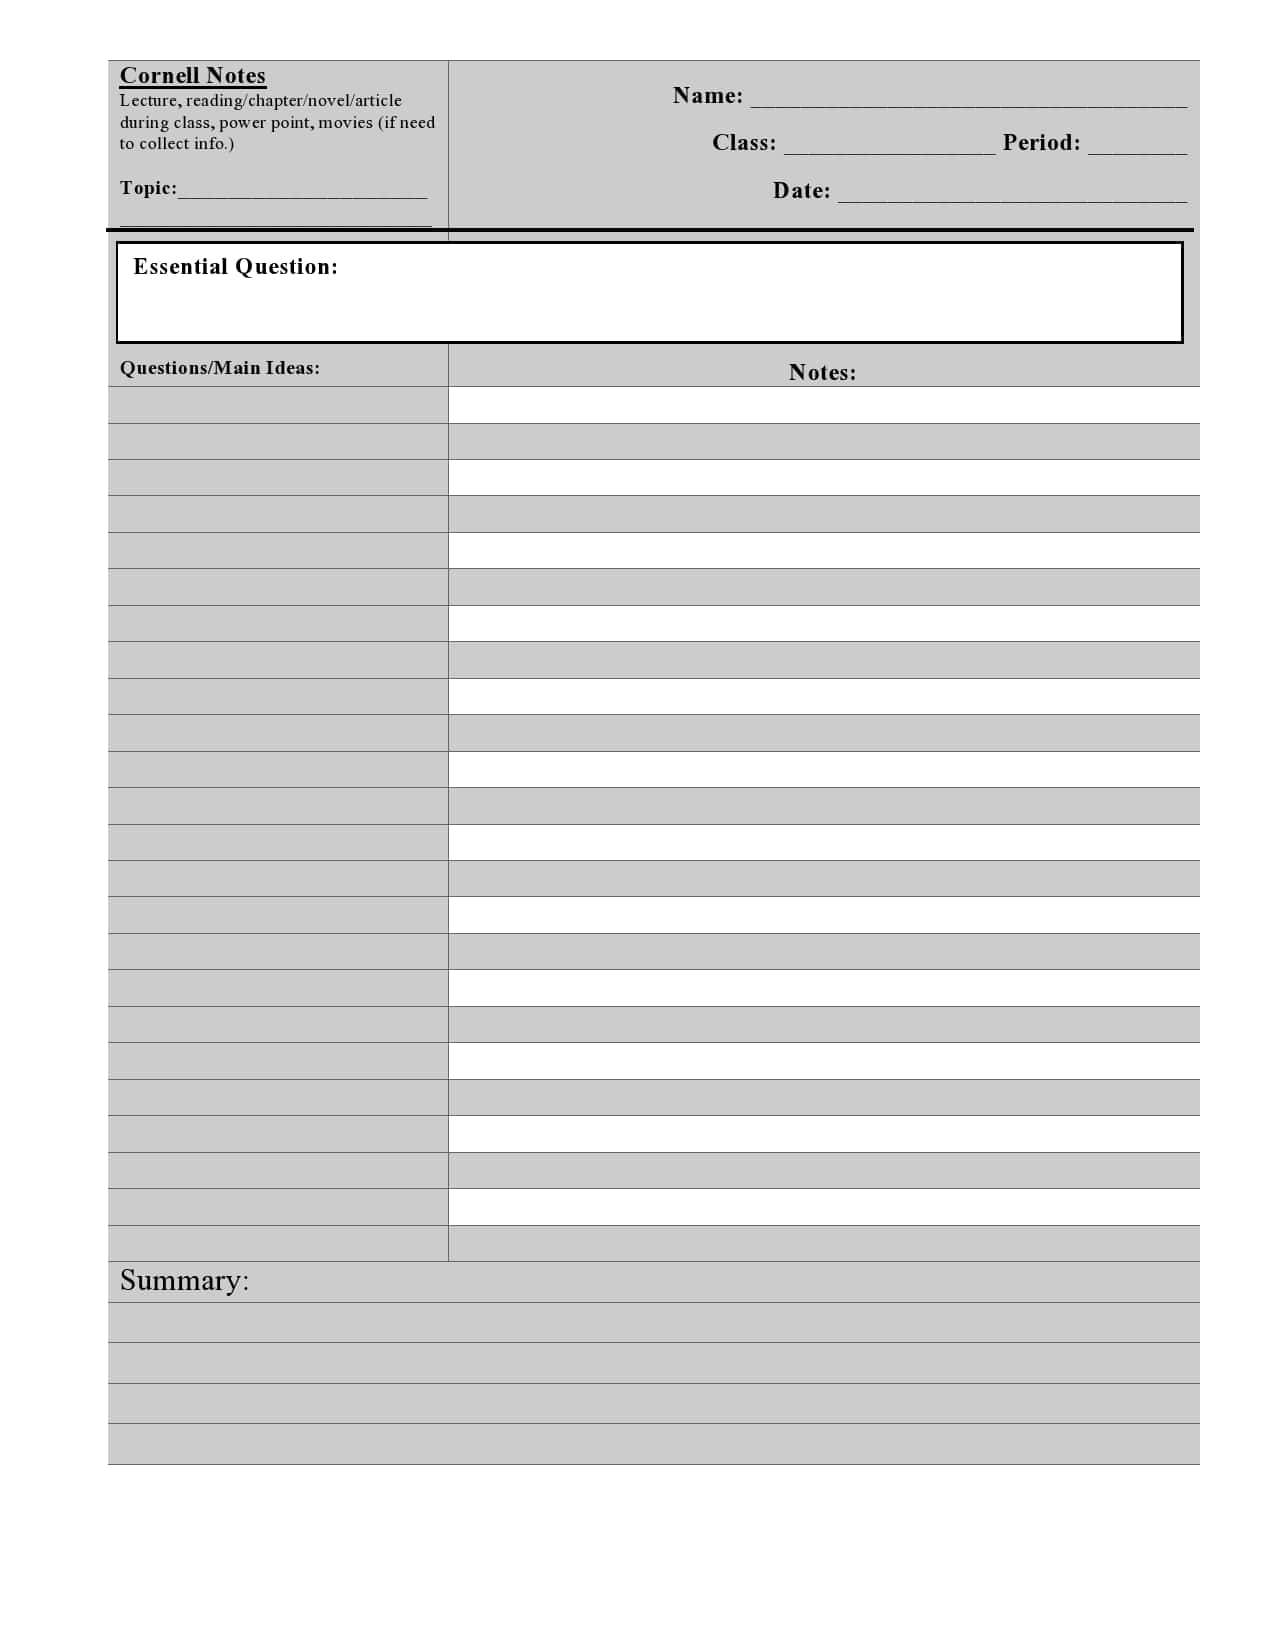 22 Printable Cornell Notes Templates [Free] - TemplateArchive Within 3 Column Notes Template